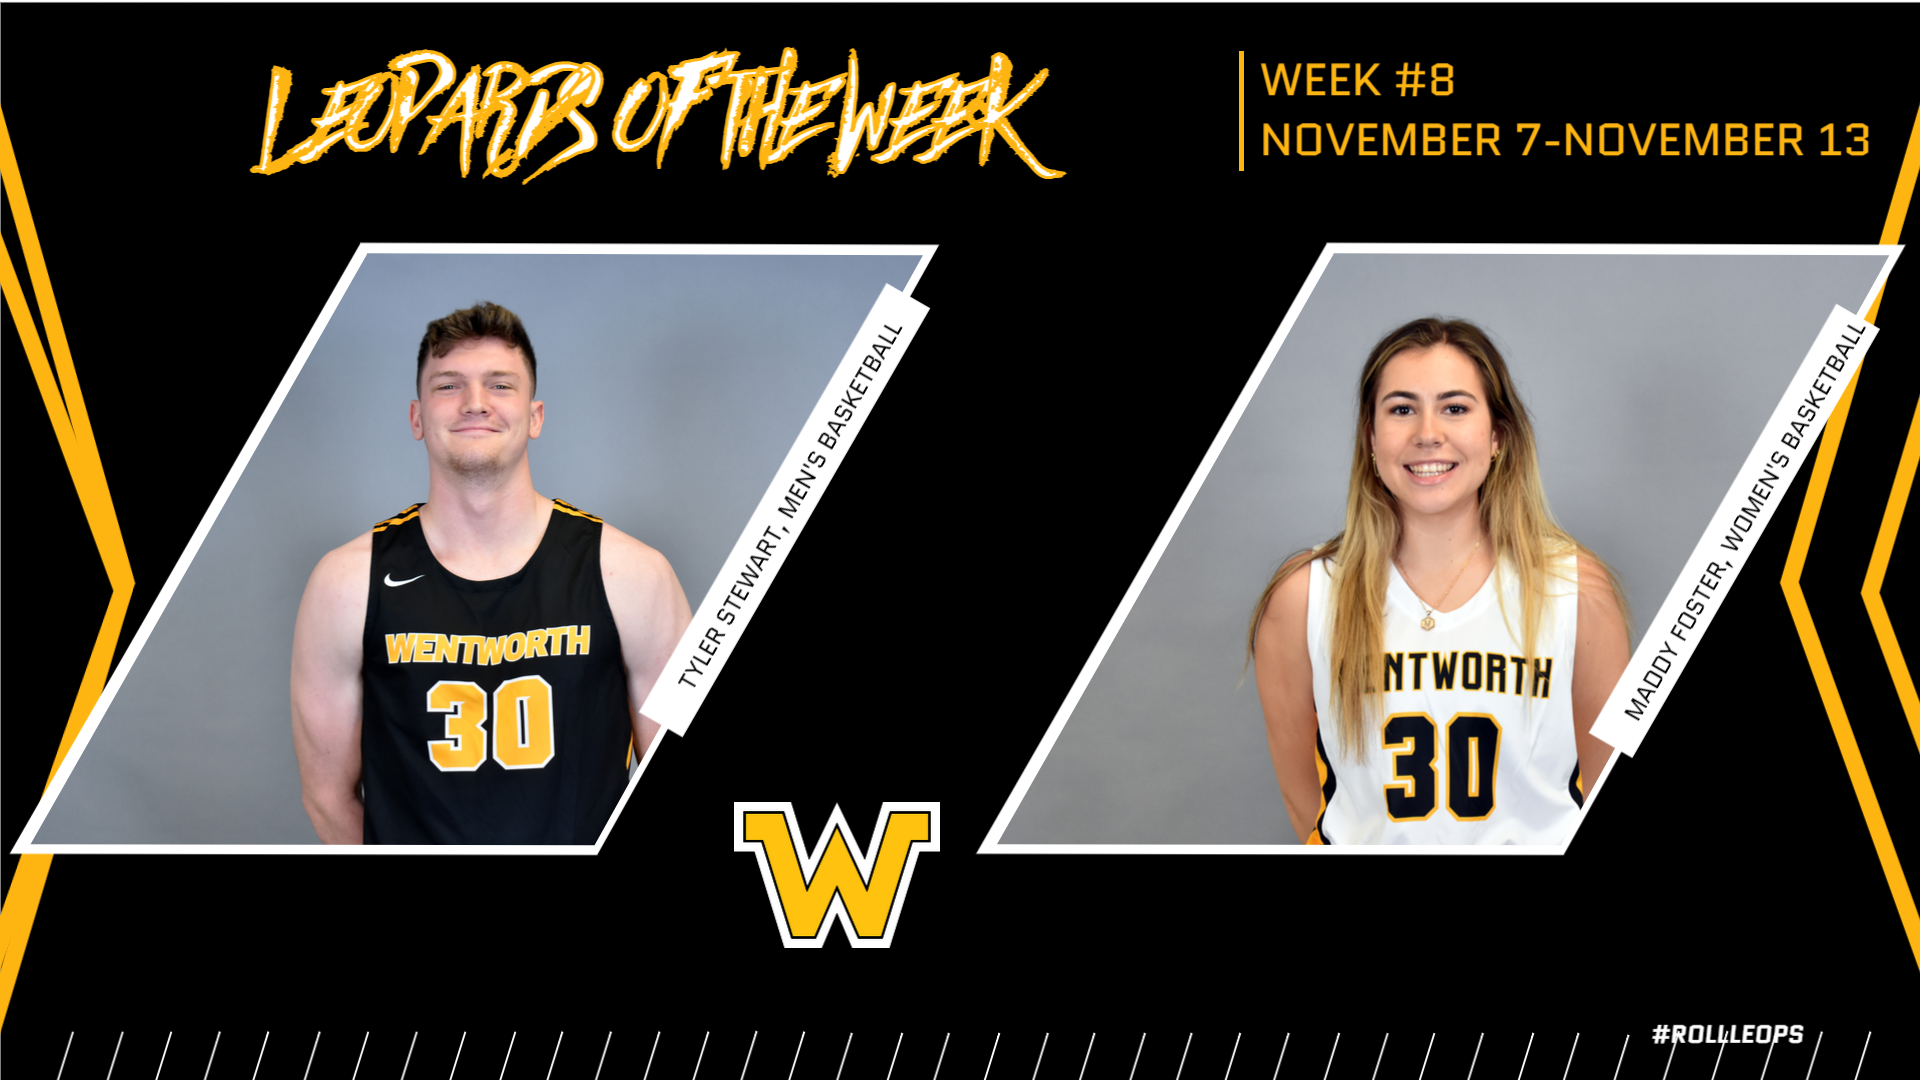 Stewart, Foster Named Leopards of the Week